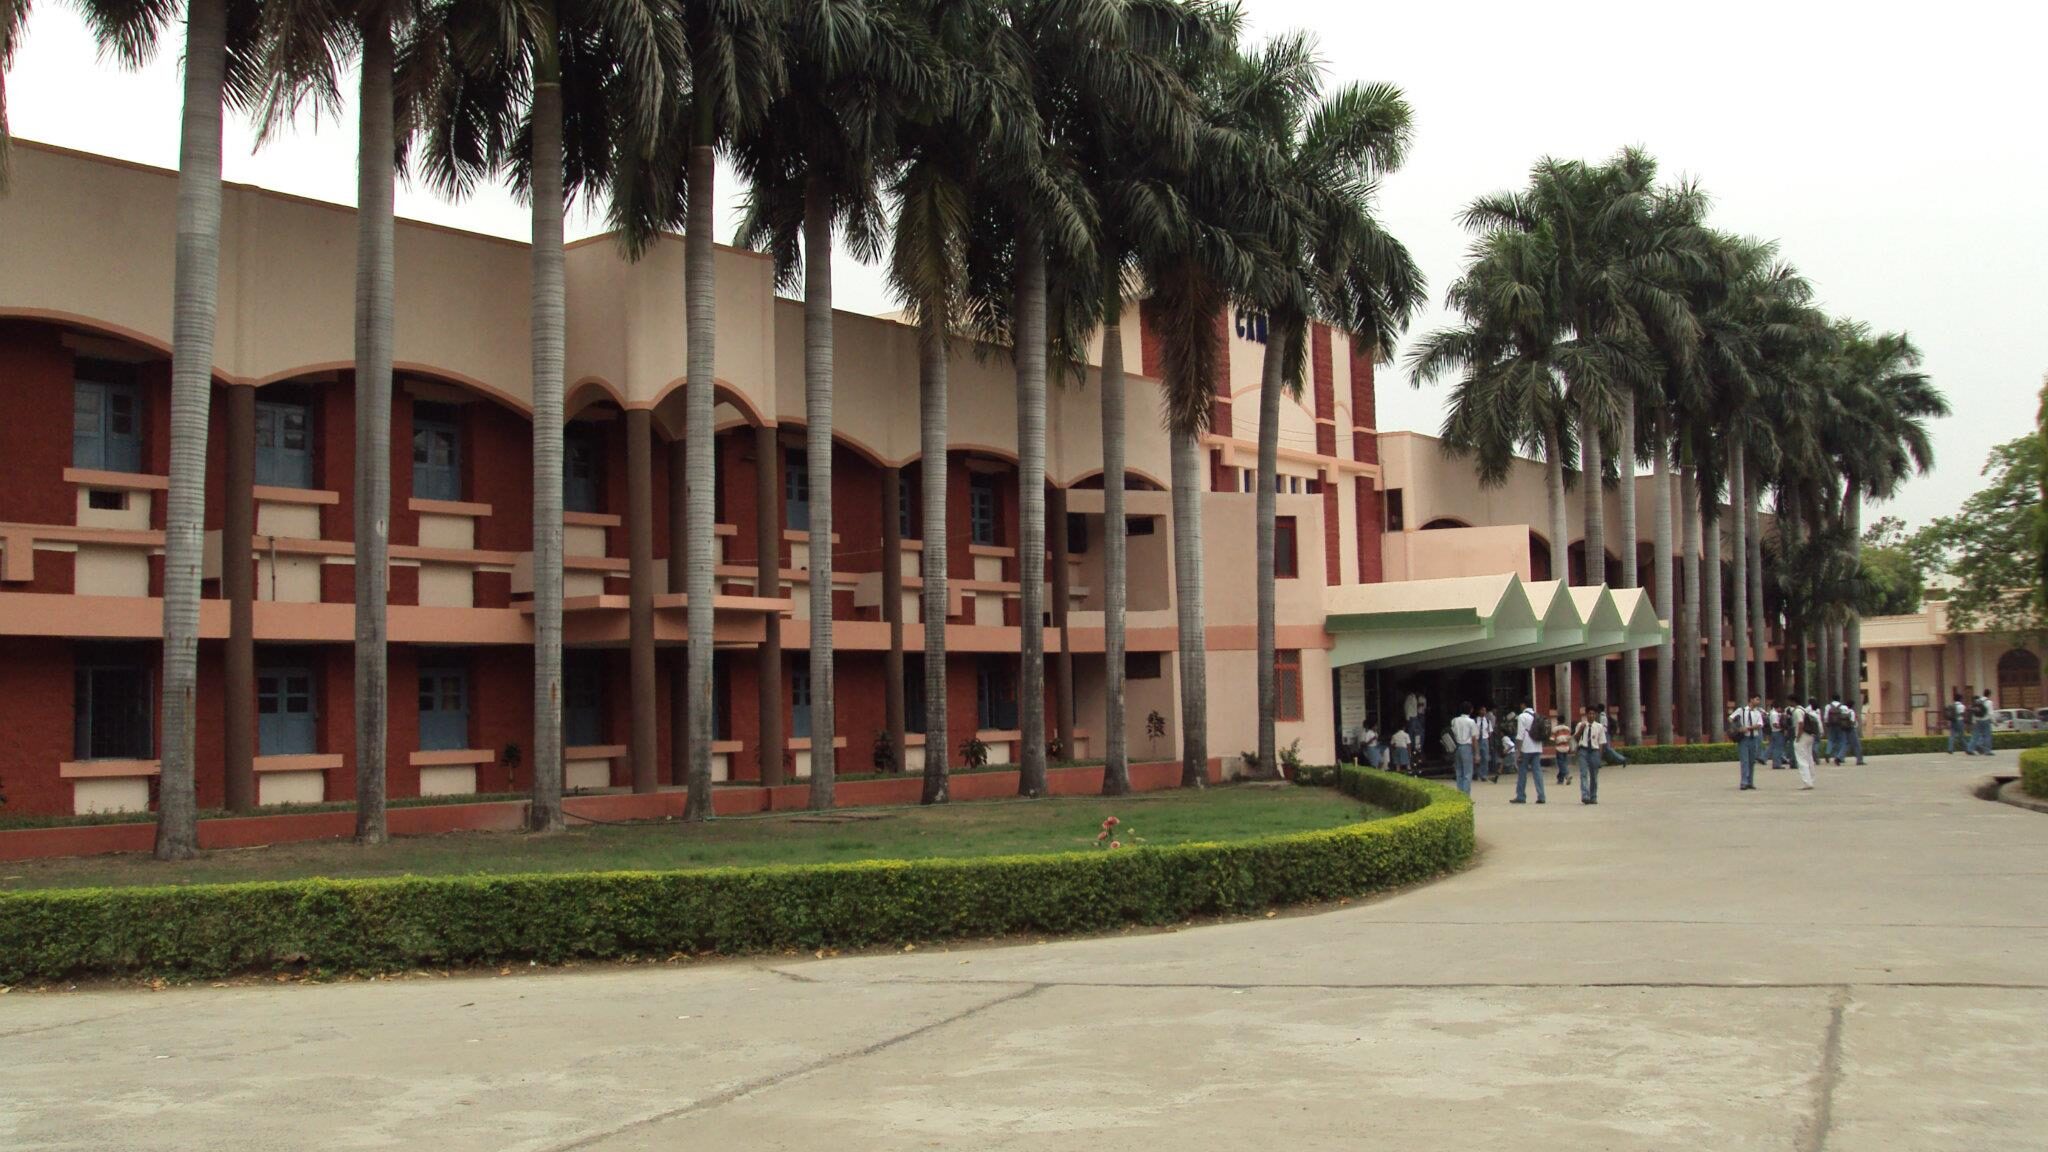 Campion School Bhopal is one of the oldest schools in Bhopal.